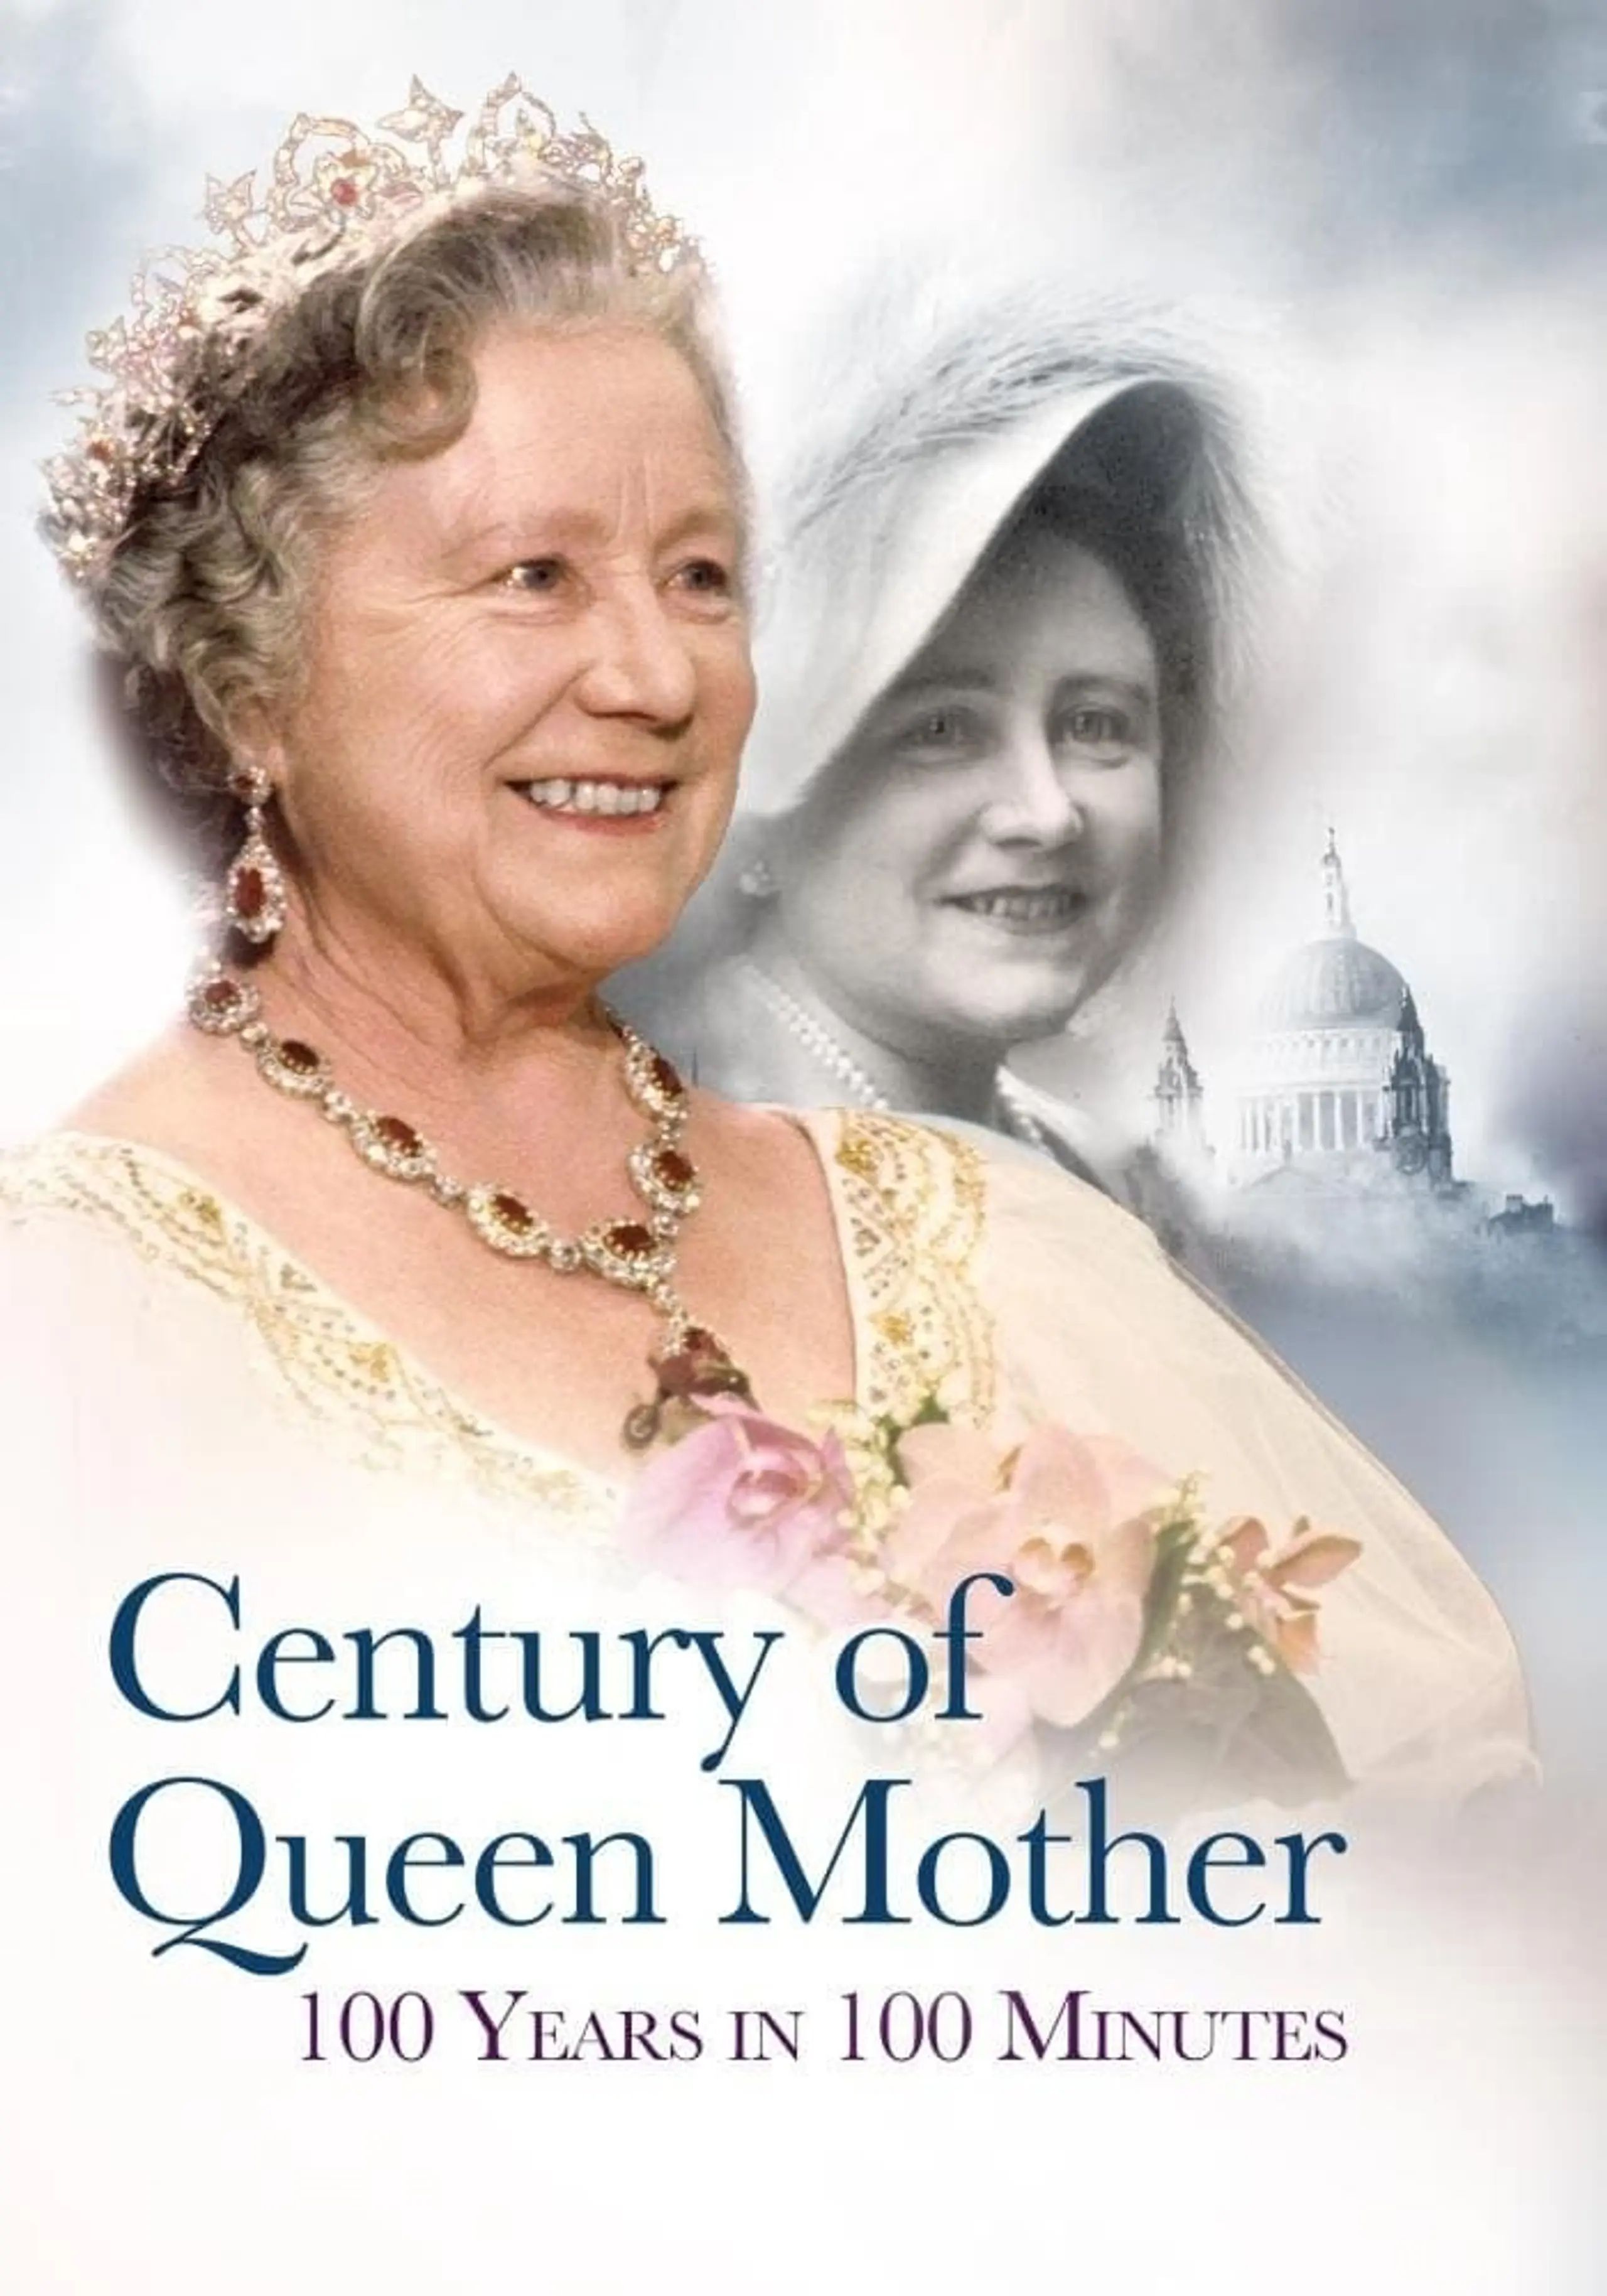 Century of Queen Mother - 100 Years in 100 Minutes: A Celebration